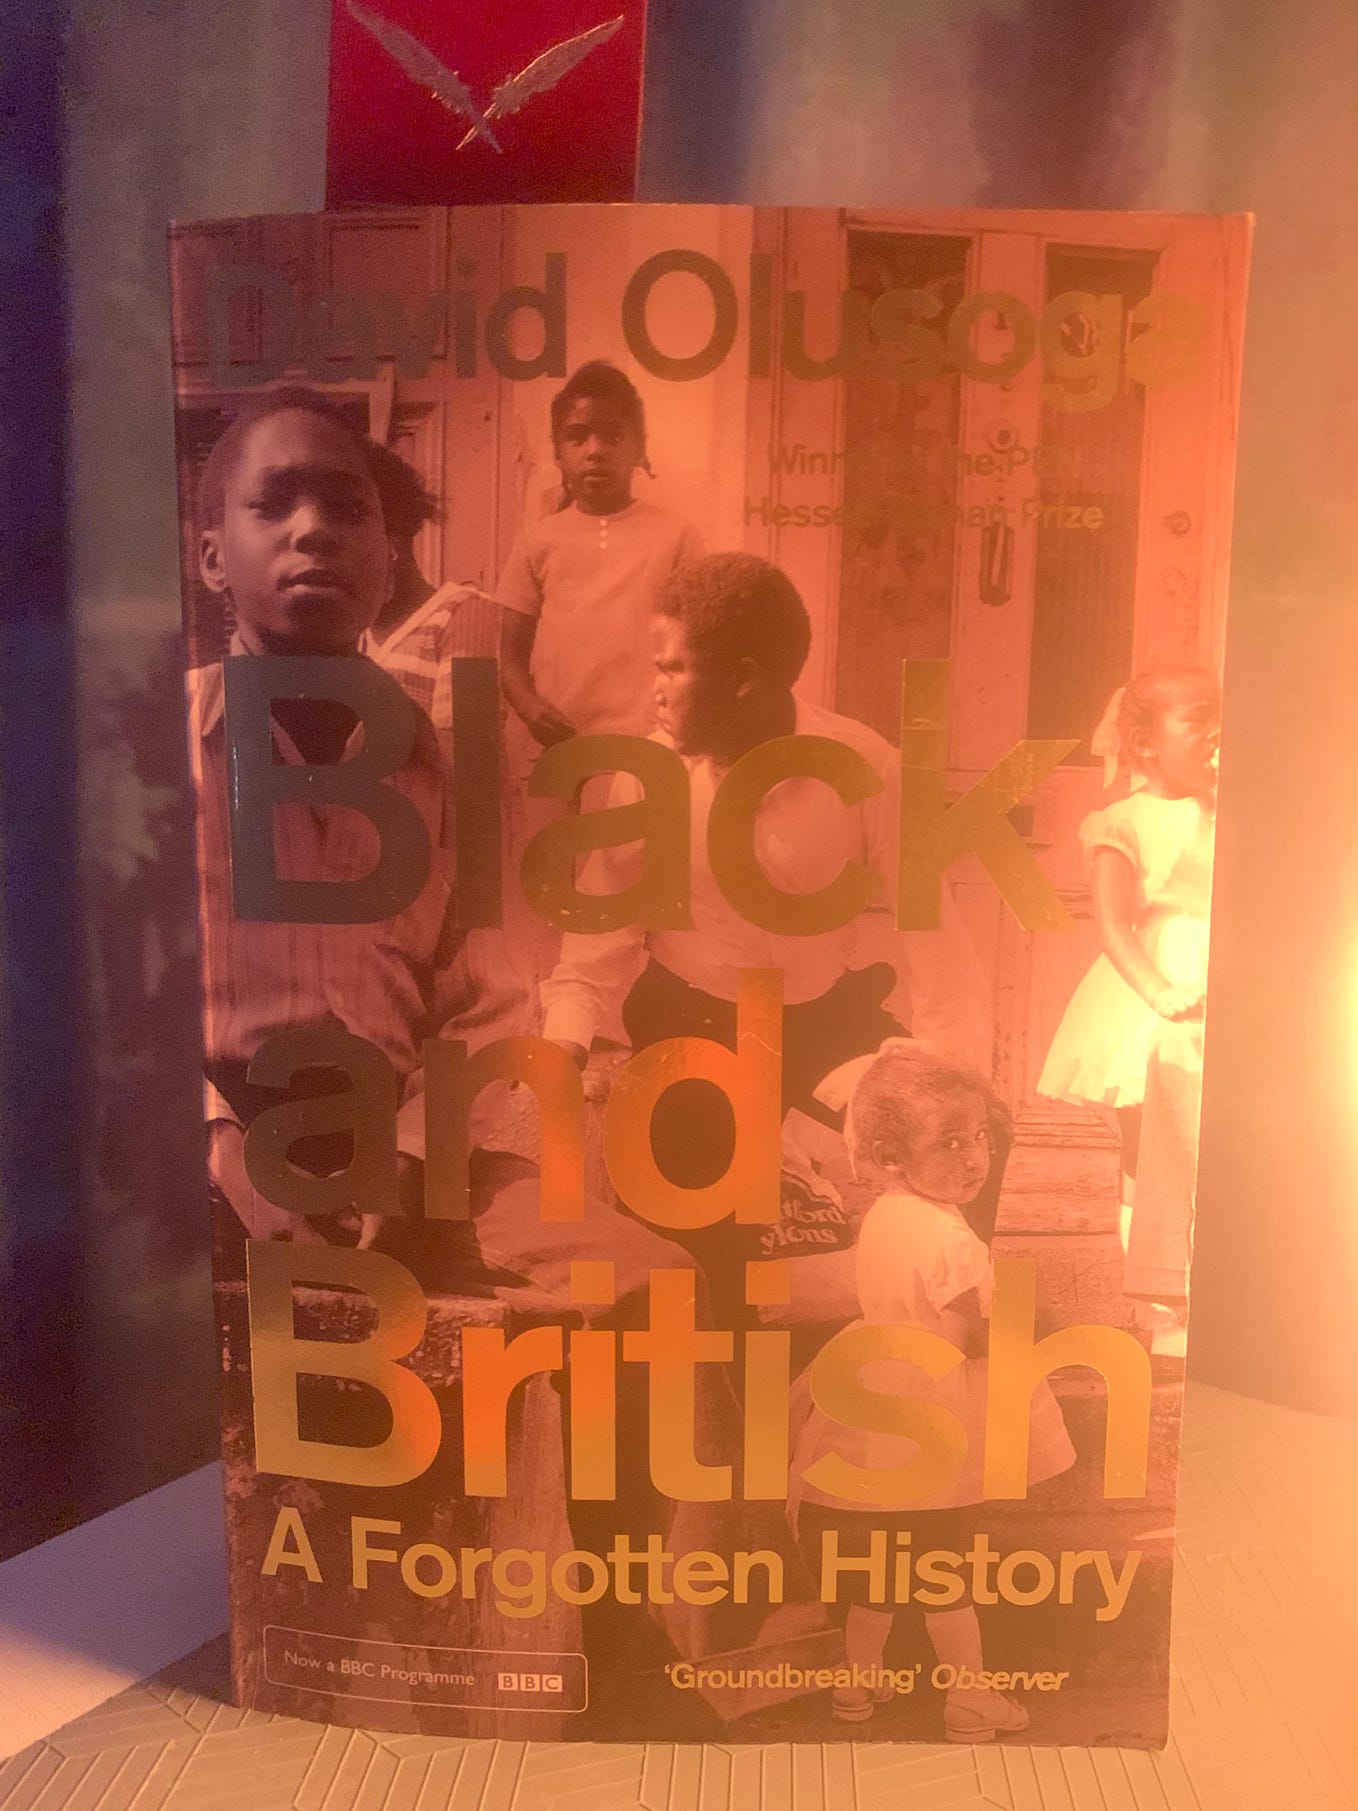 BOOK REVIEW: Black and British: A Forgotten History by David Olusoga